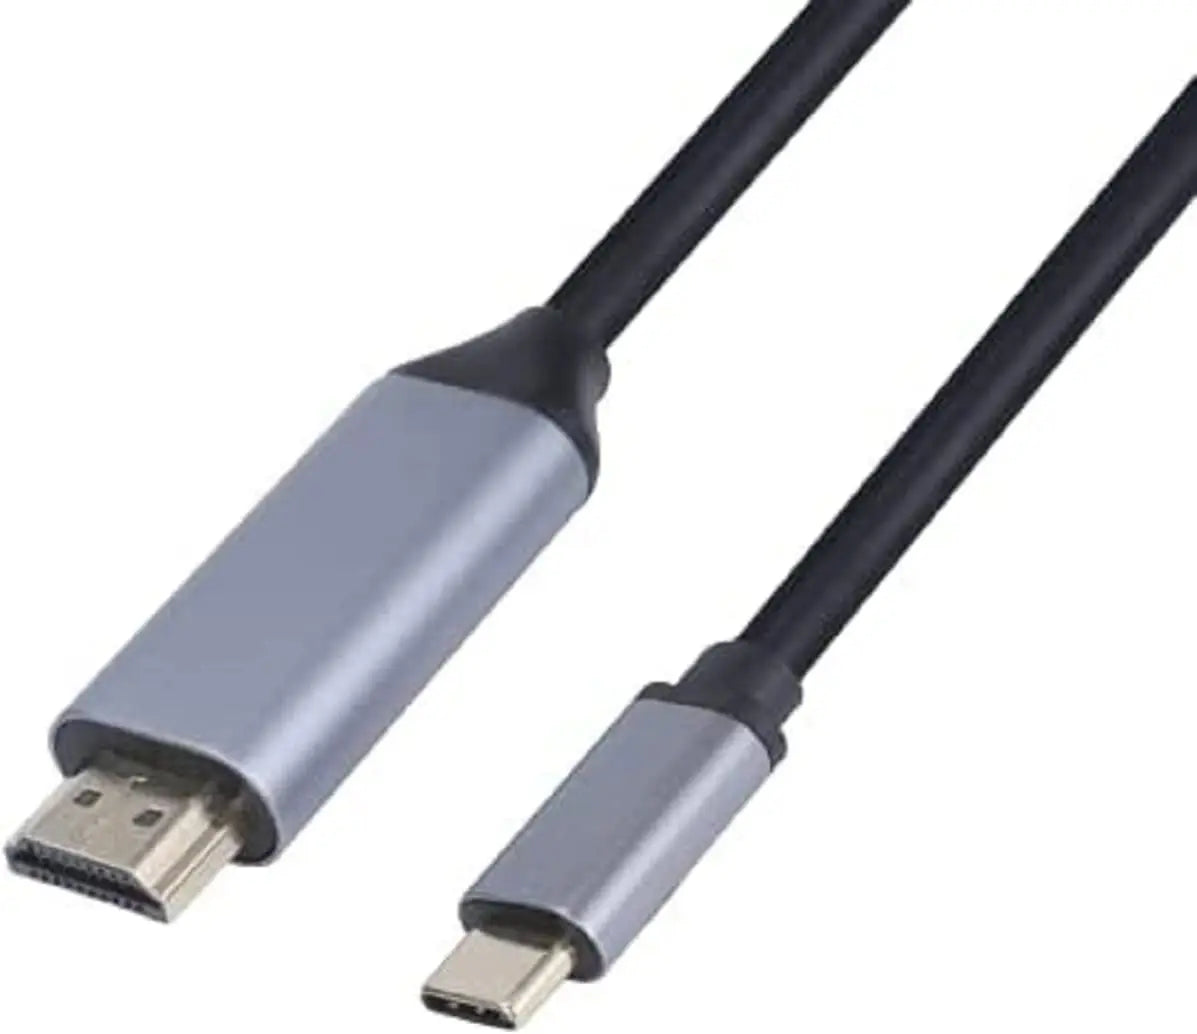 HDMI to HDMI Cable - Best Cable Quality in Pakistan Price in Pakistan -  Select Pakistan 